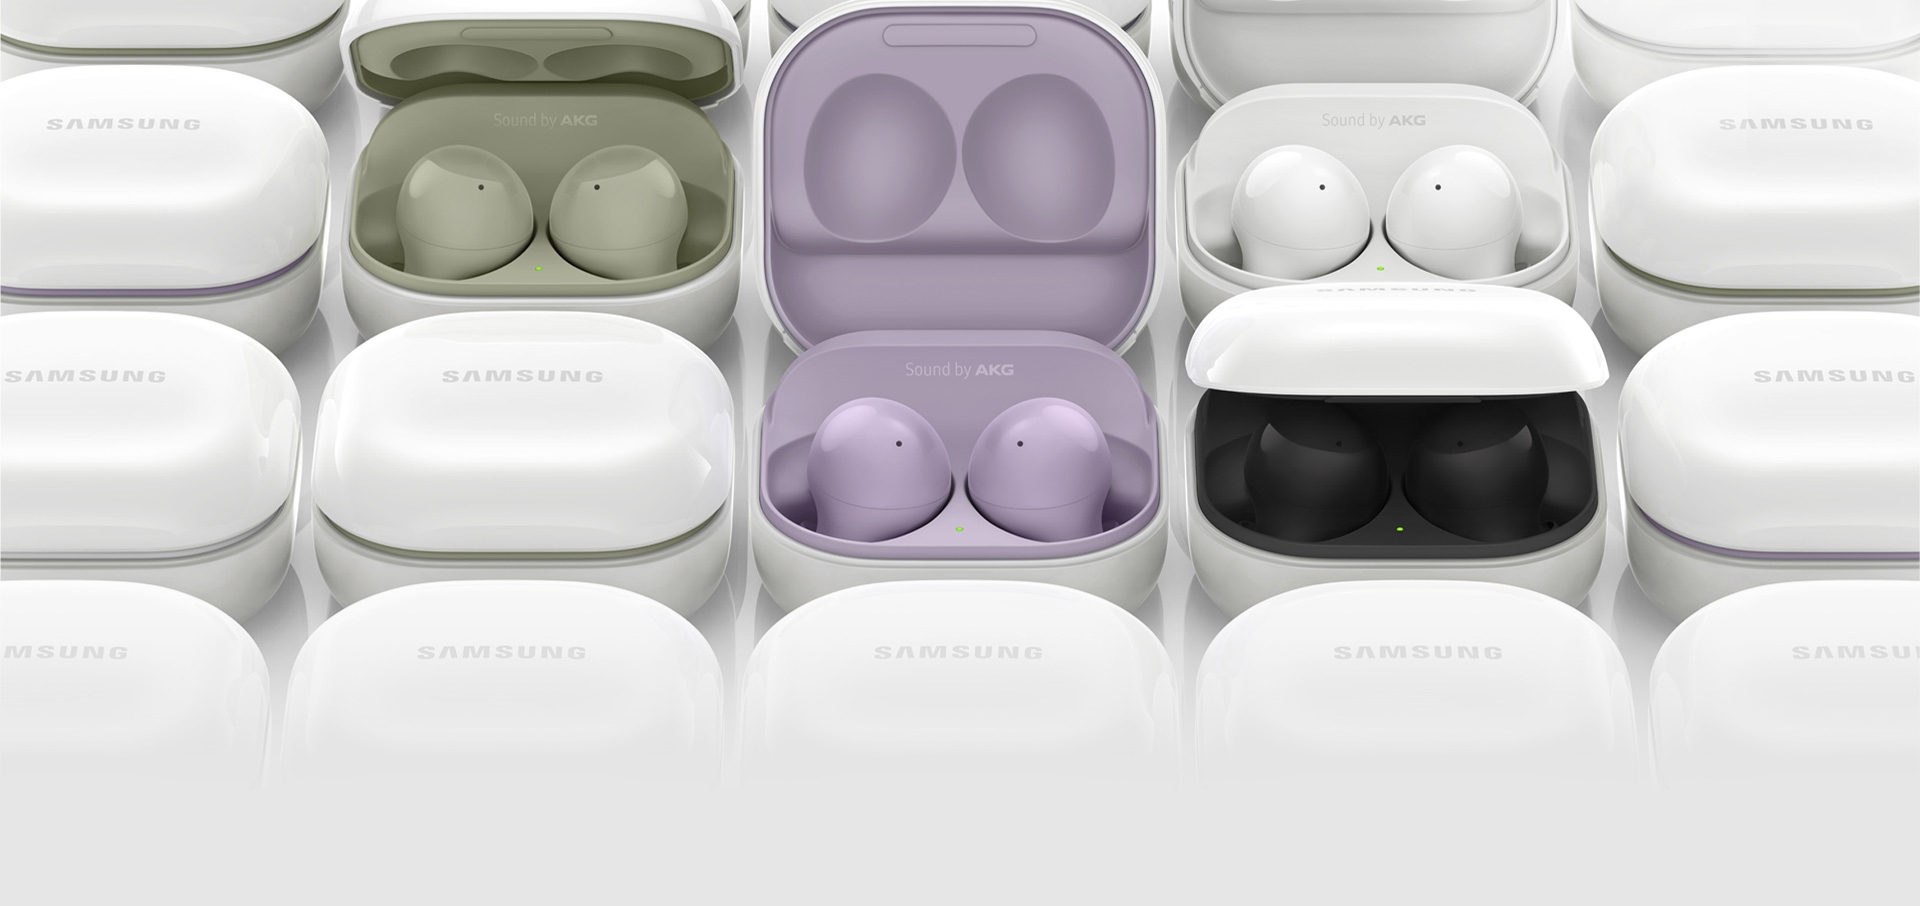 Galaxy Buds2 cases are placed next to each other. Several of the cases are opened, each showing different colors of the inside case, from olive green, lavender, white, to black.